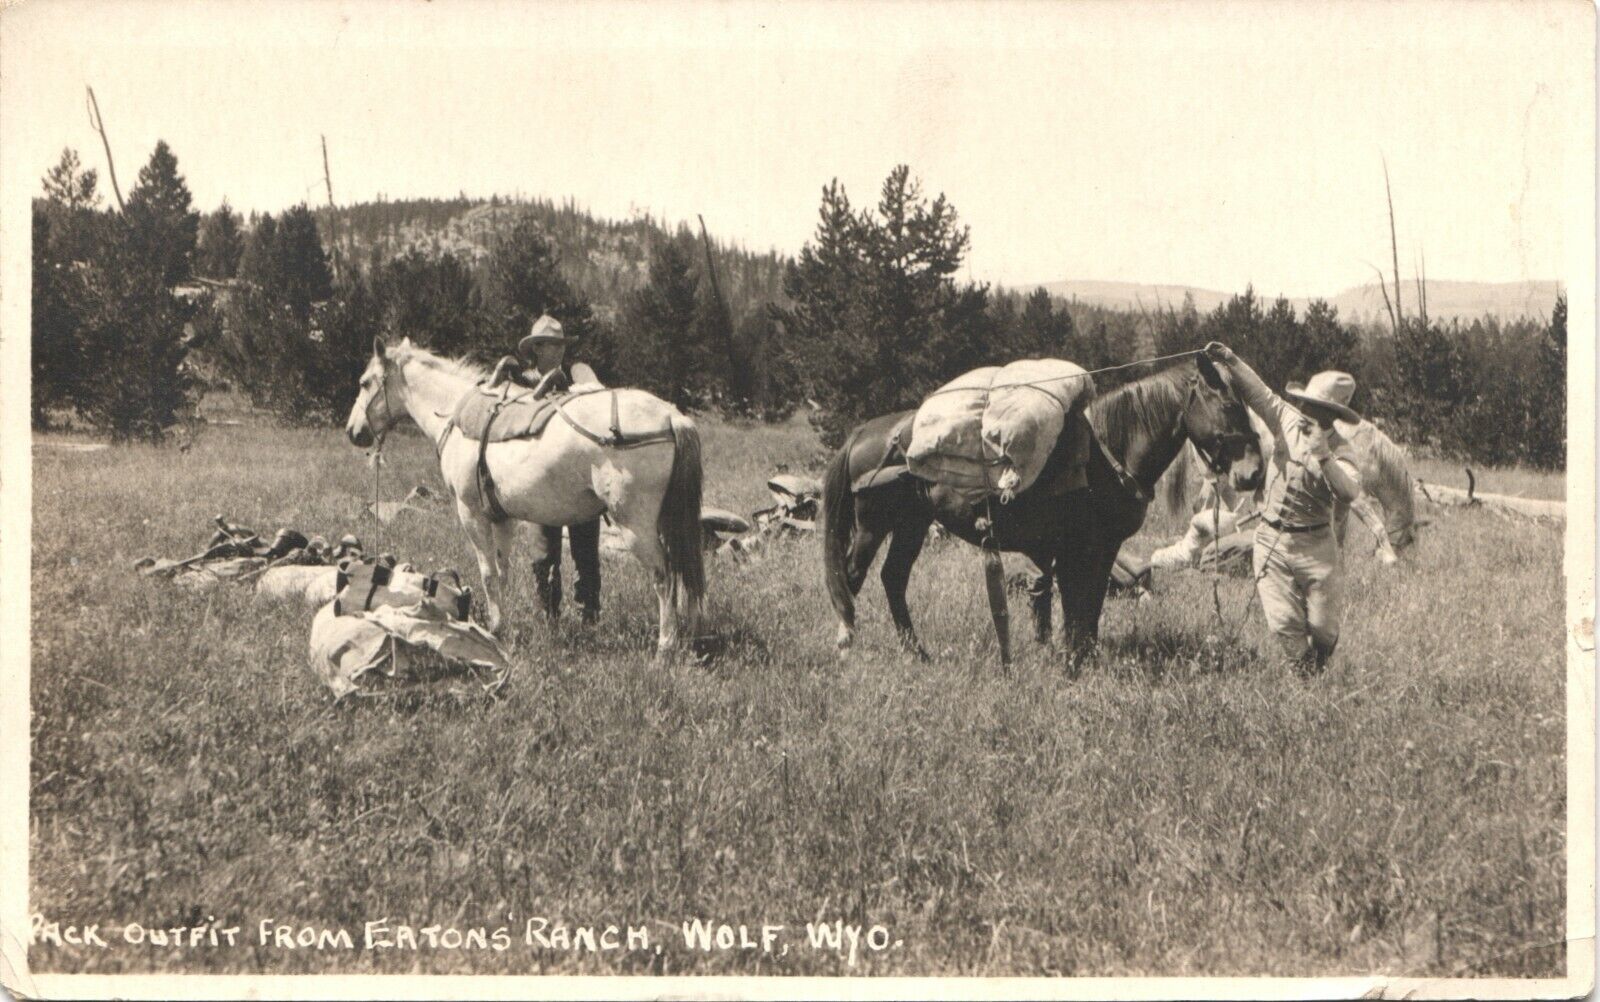 WOLF, WY, PACK OUTFIT real photo postcard WYOMING RPPC 1920 HORSES eaton's ranch